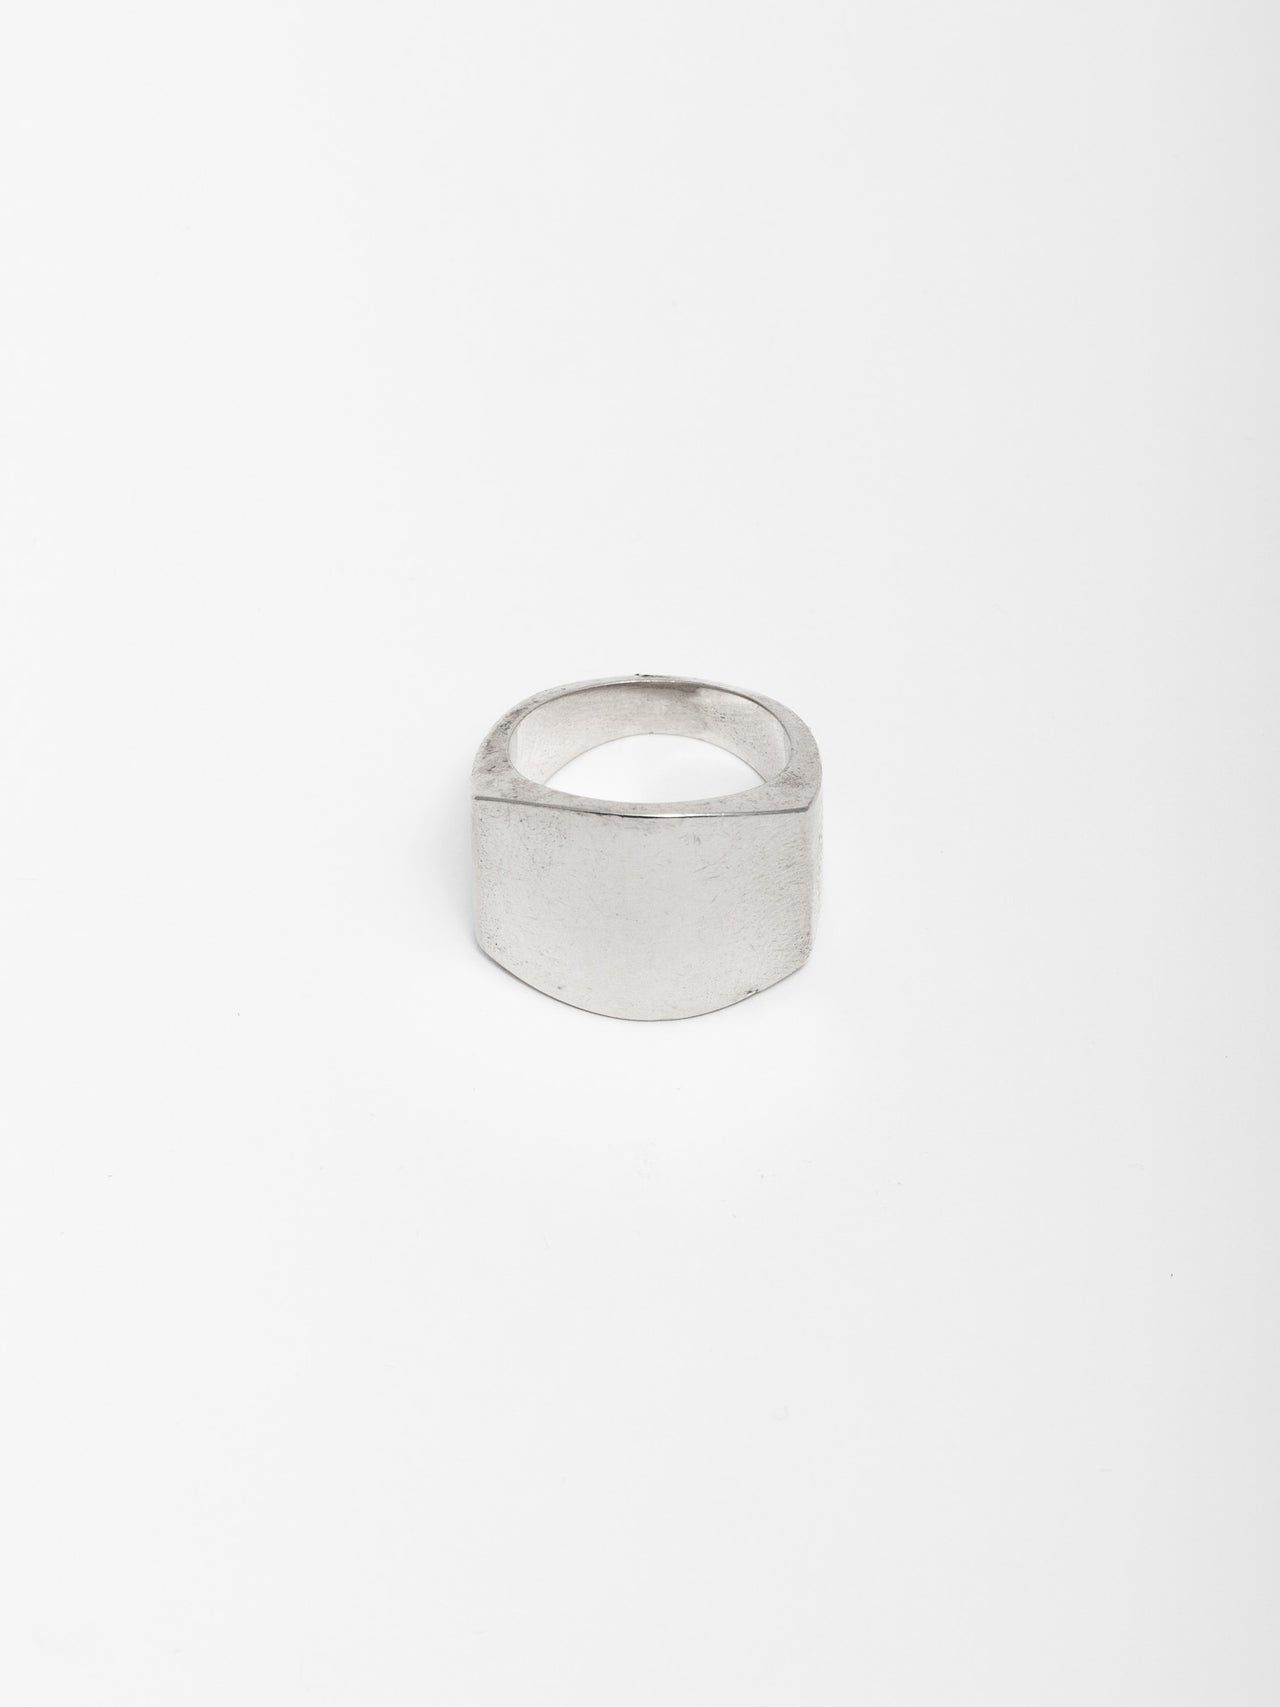 Sterling Silver ID Ring pictured on light grey background.